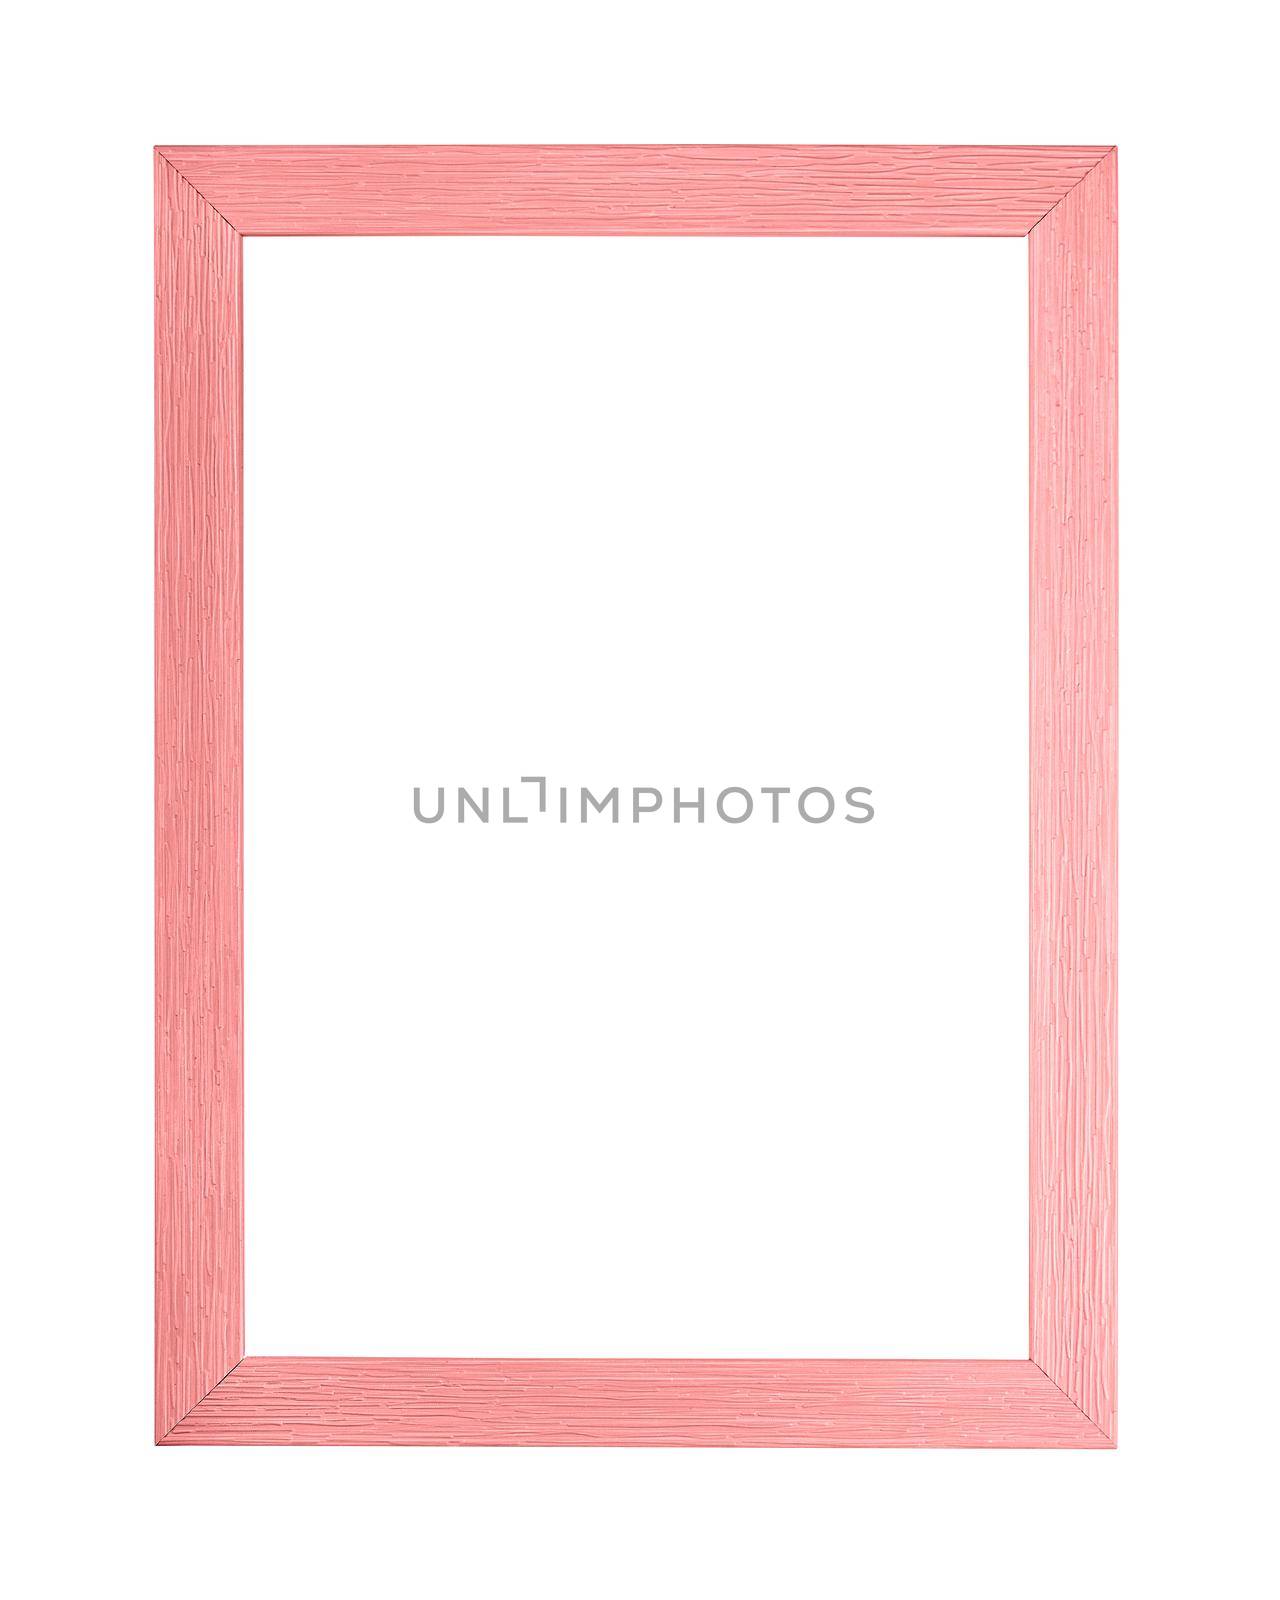 Modern pastel color pink painted rectangular vertical frame for picture or photo, isolated on white background